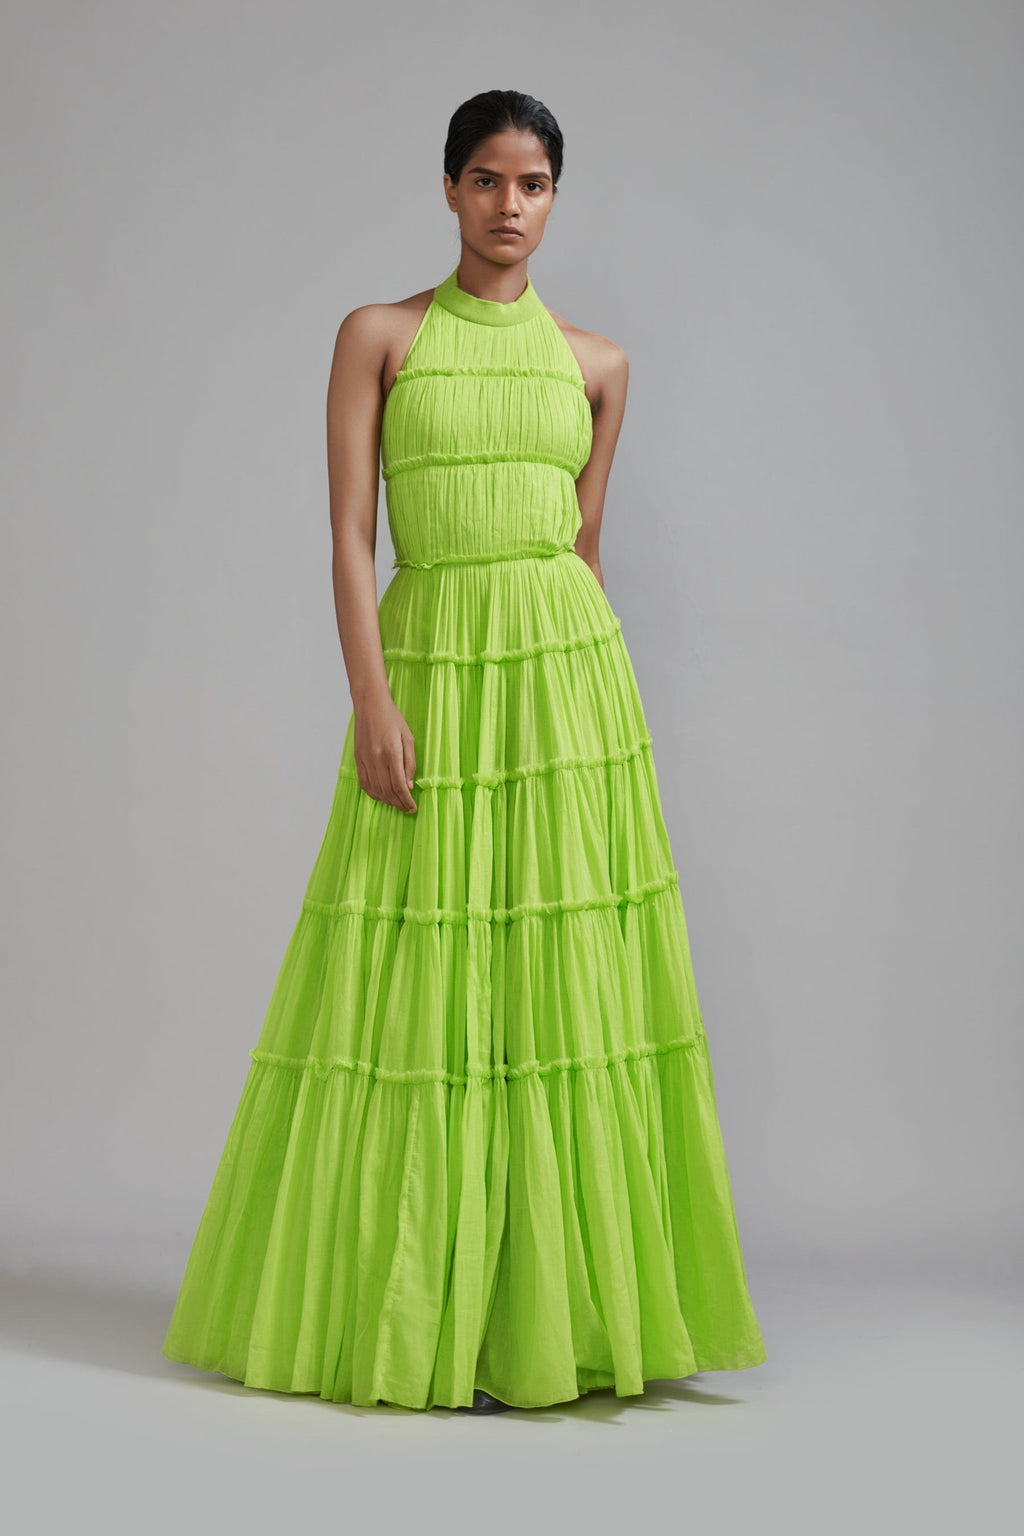 Mati Dresses Neon Green Backless Tiered Gown